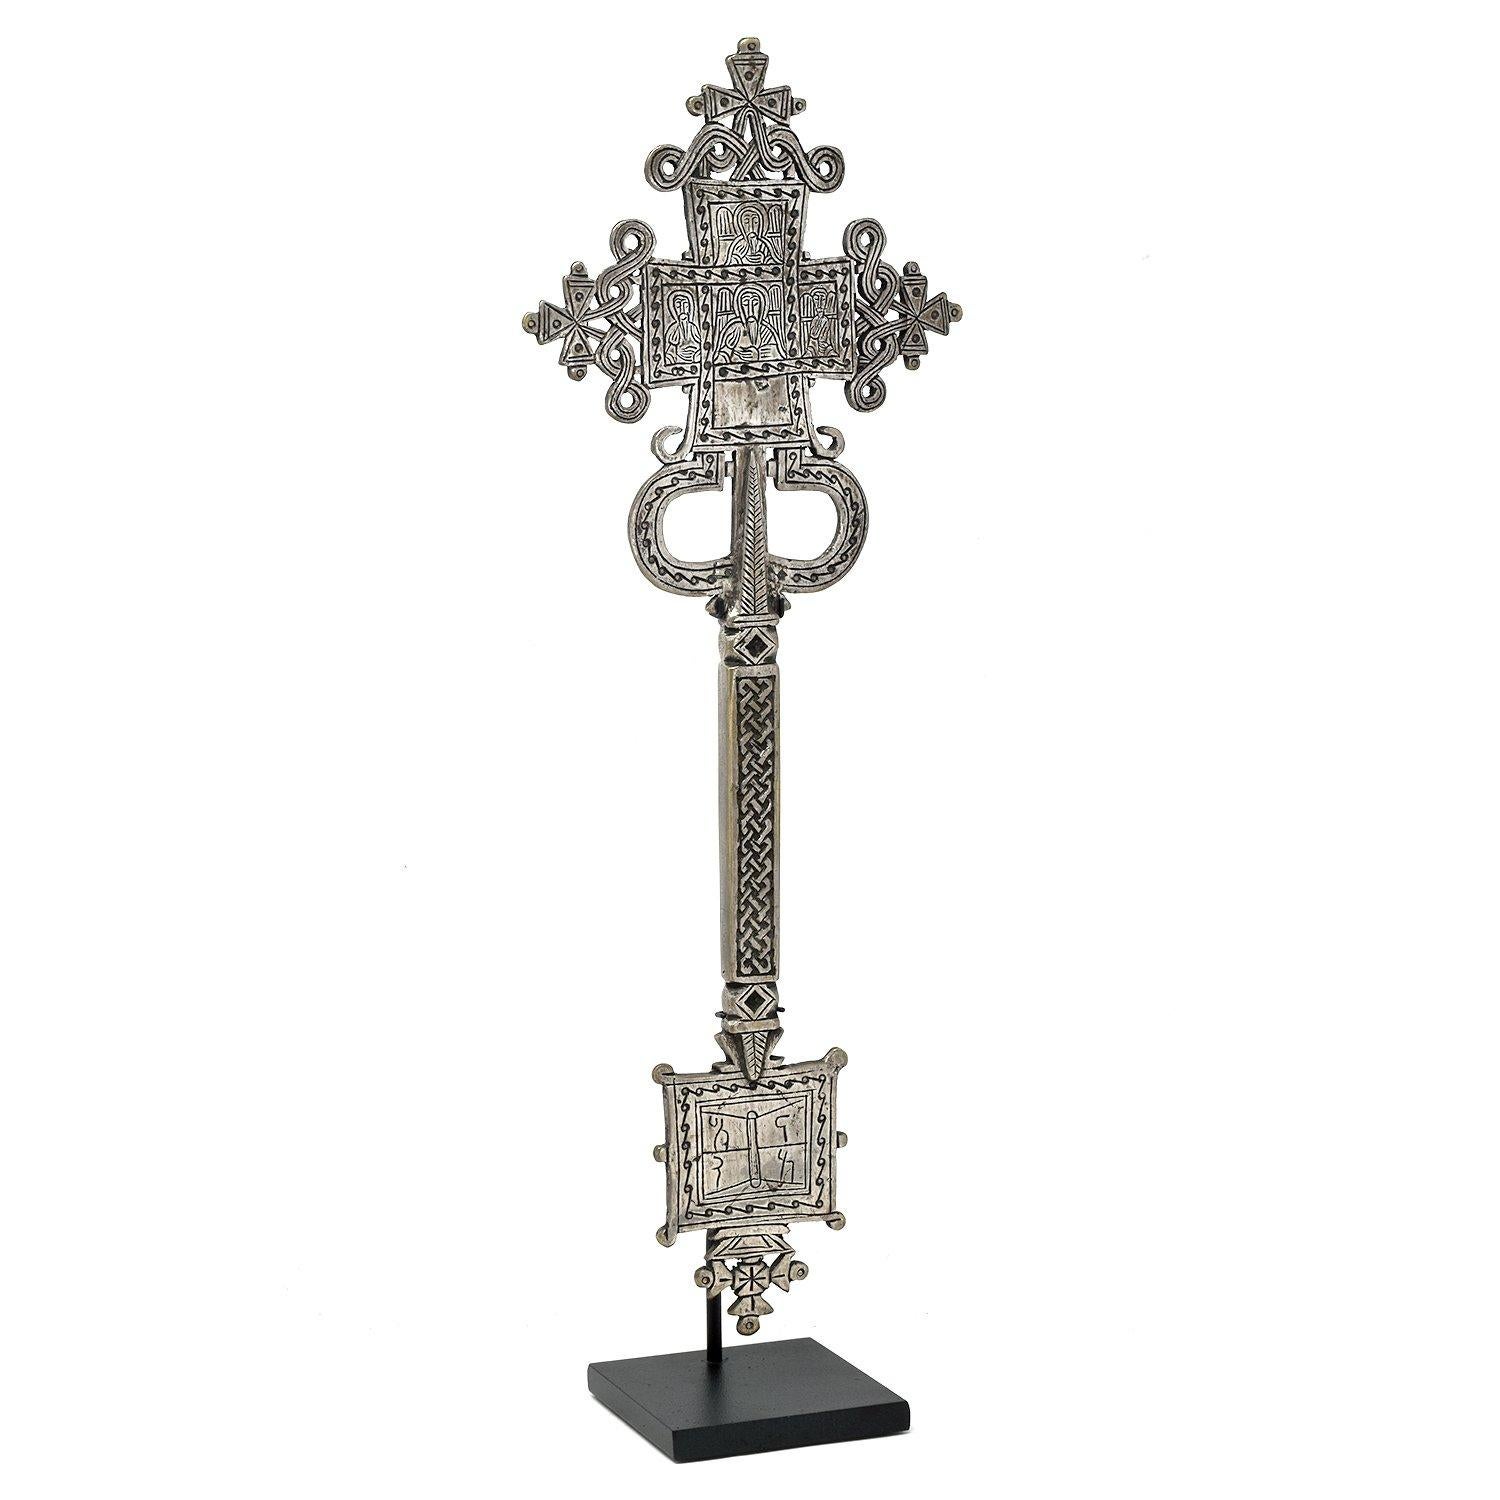 Coptic hand cross, Ethiopia.

Carried by hand during services
Ethiopia
Silver-plated copper alloy
Mid 20th century
Measures: 15.5 x 5.75 x 0.5 in. / 39 x 15 x 1 cm
Height on custom display stand: 16.5 in. / 42 cm.